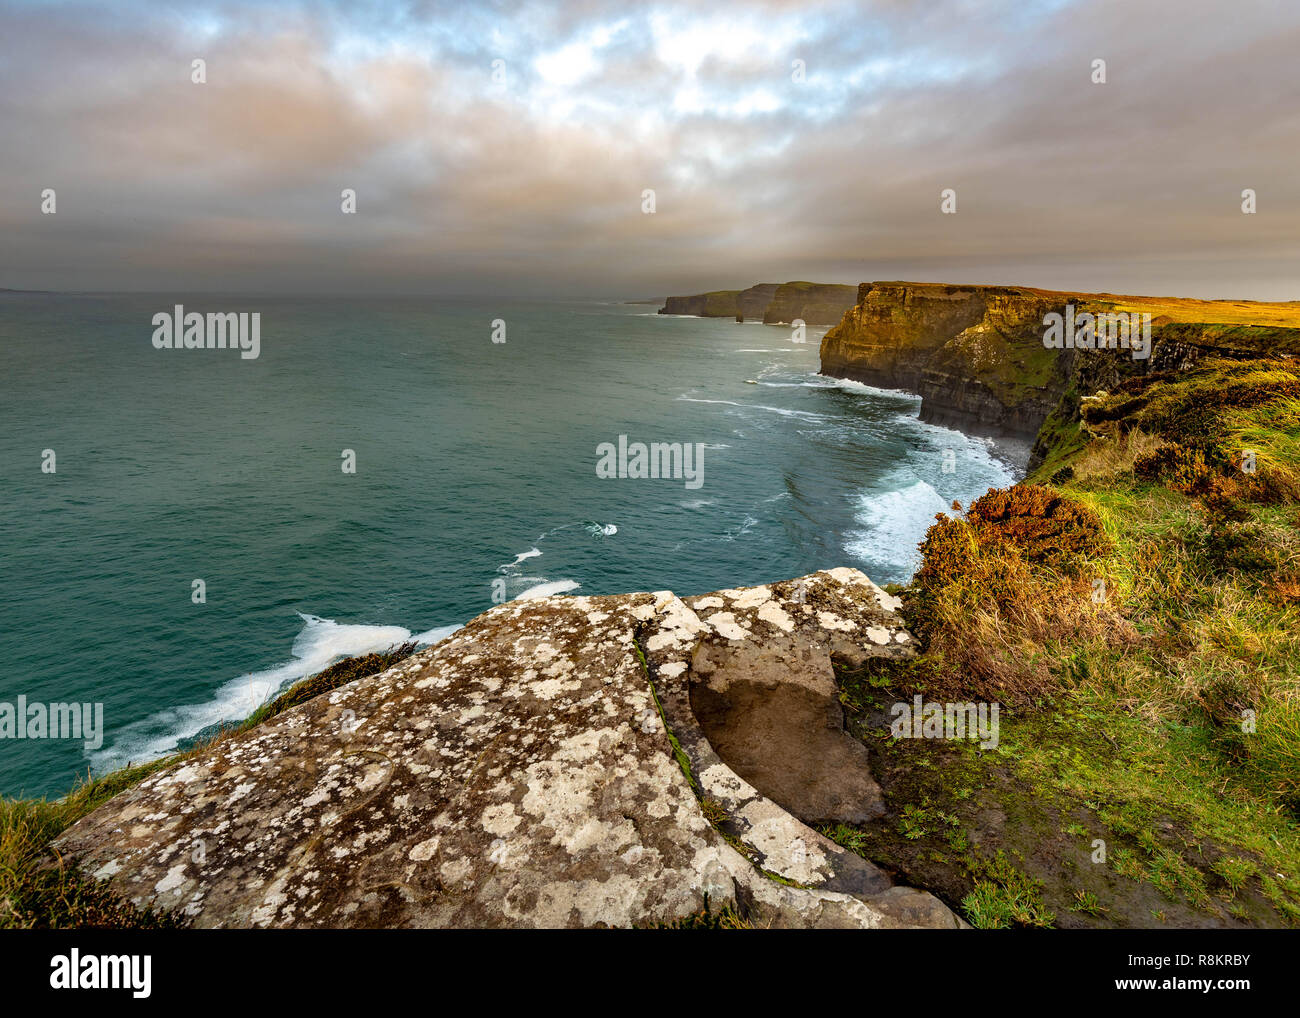 Cliffs of Moher in Ireland Stock Photo